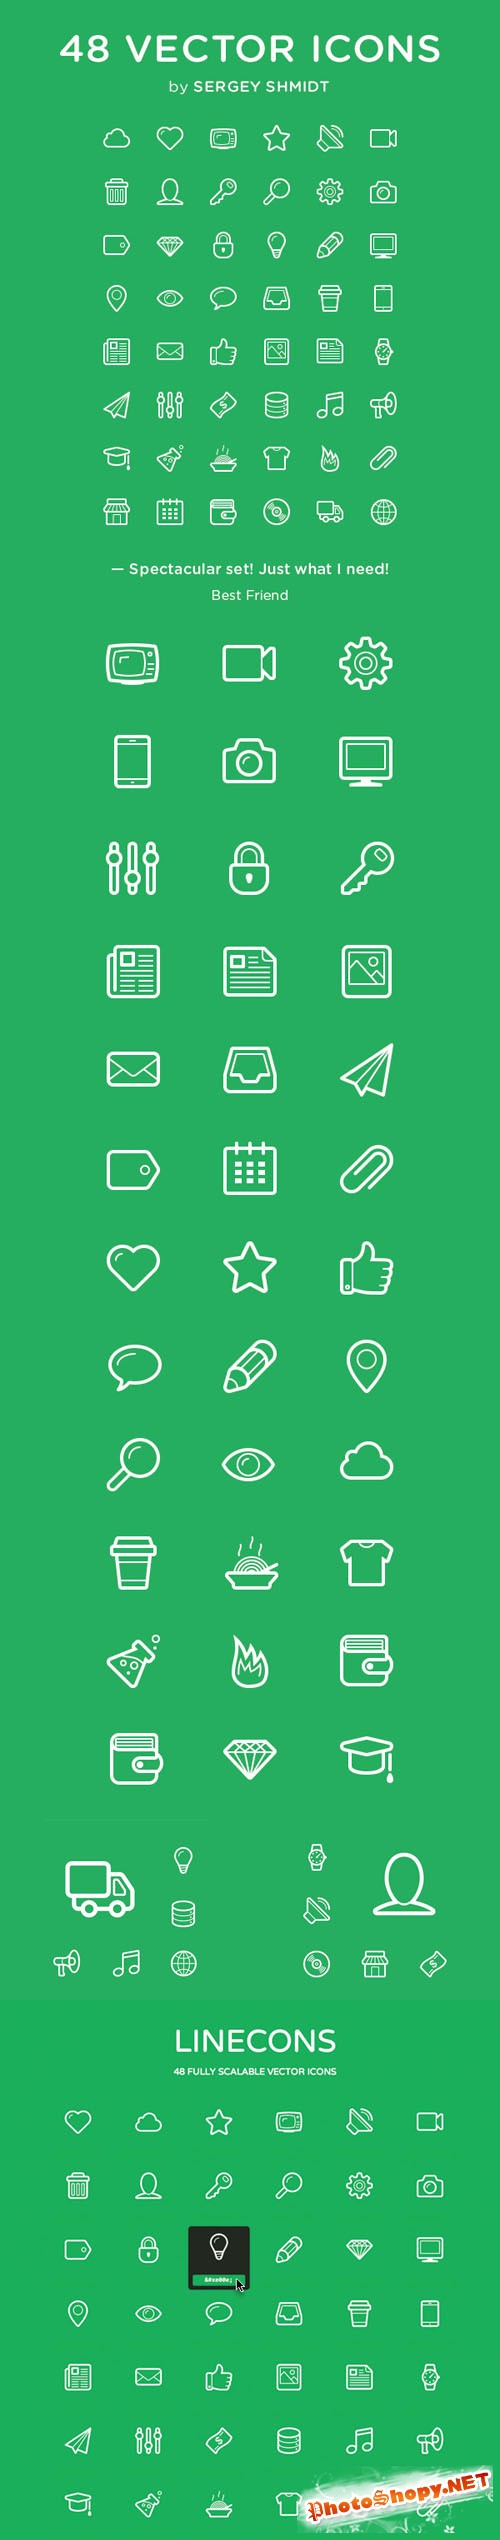 48 Linecons Vector Icons